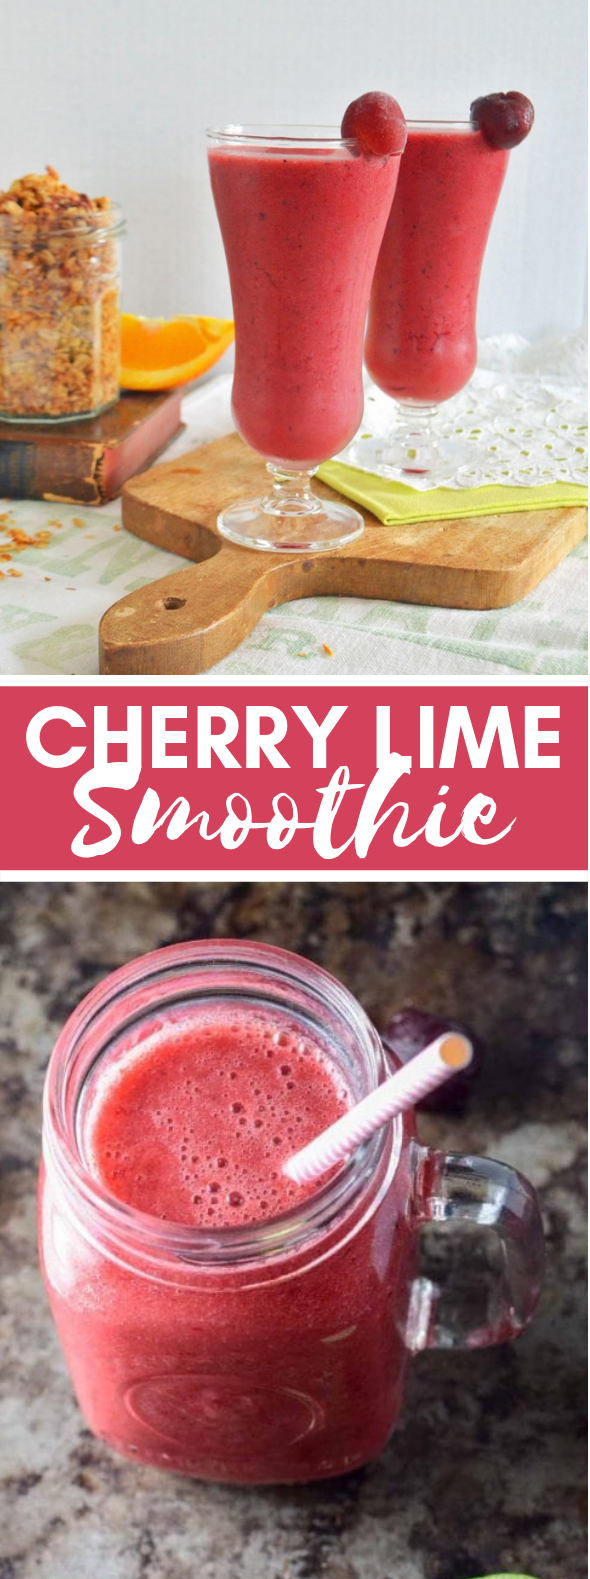 Cherry Lime Smoothie – Dietitian Approved #drinks #valentineday